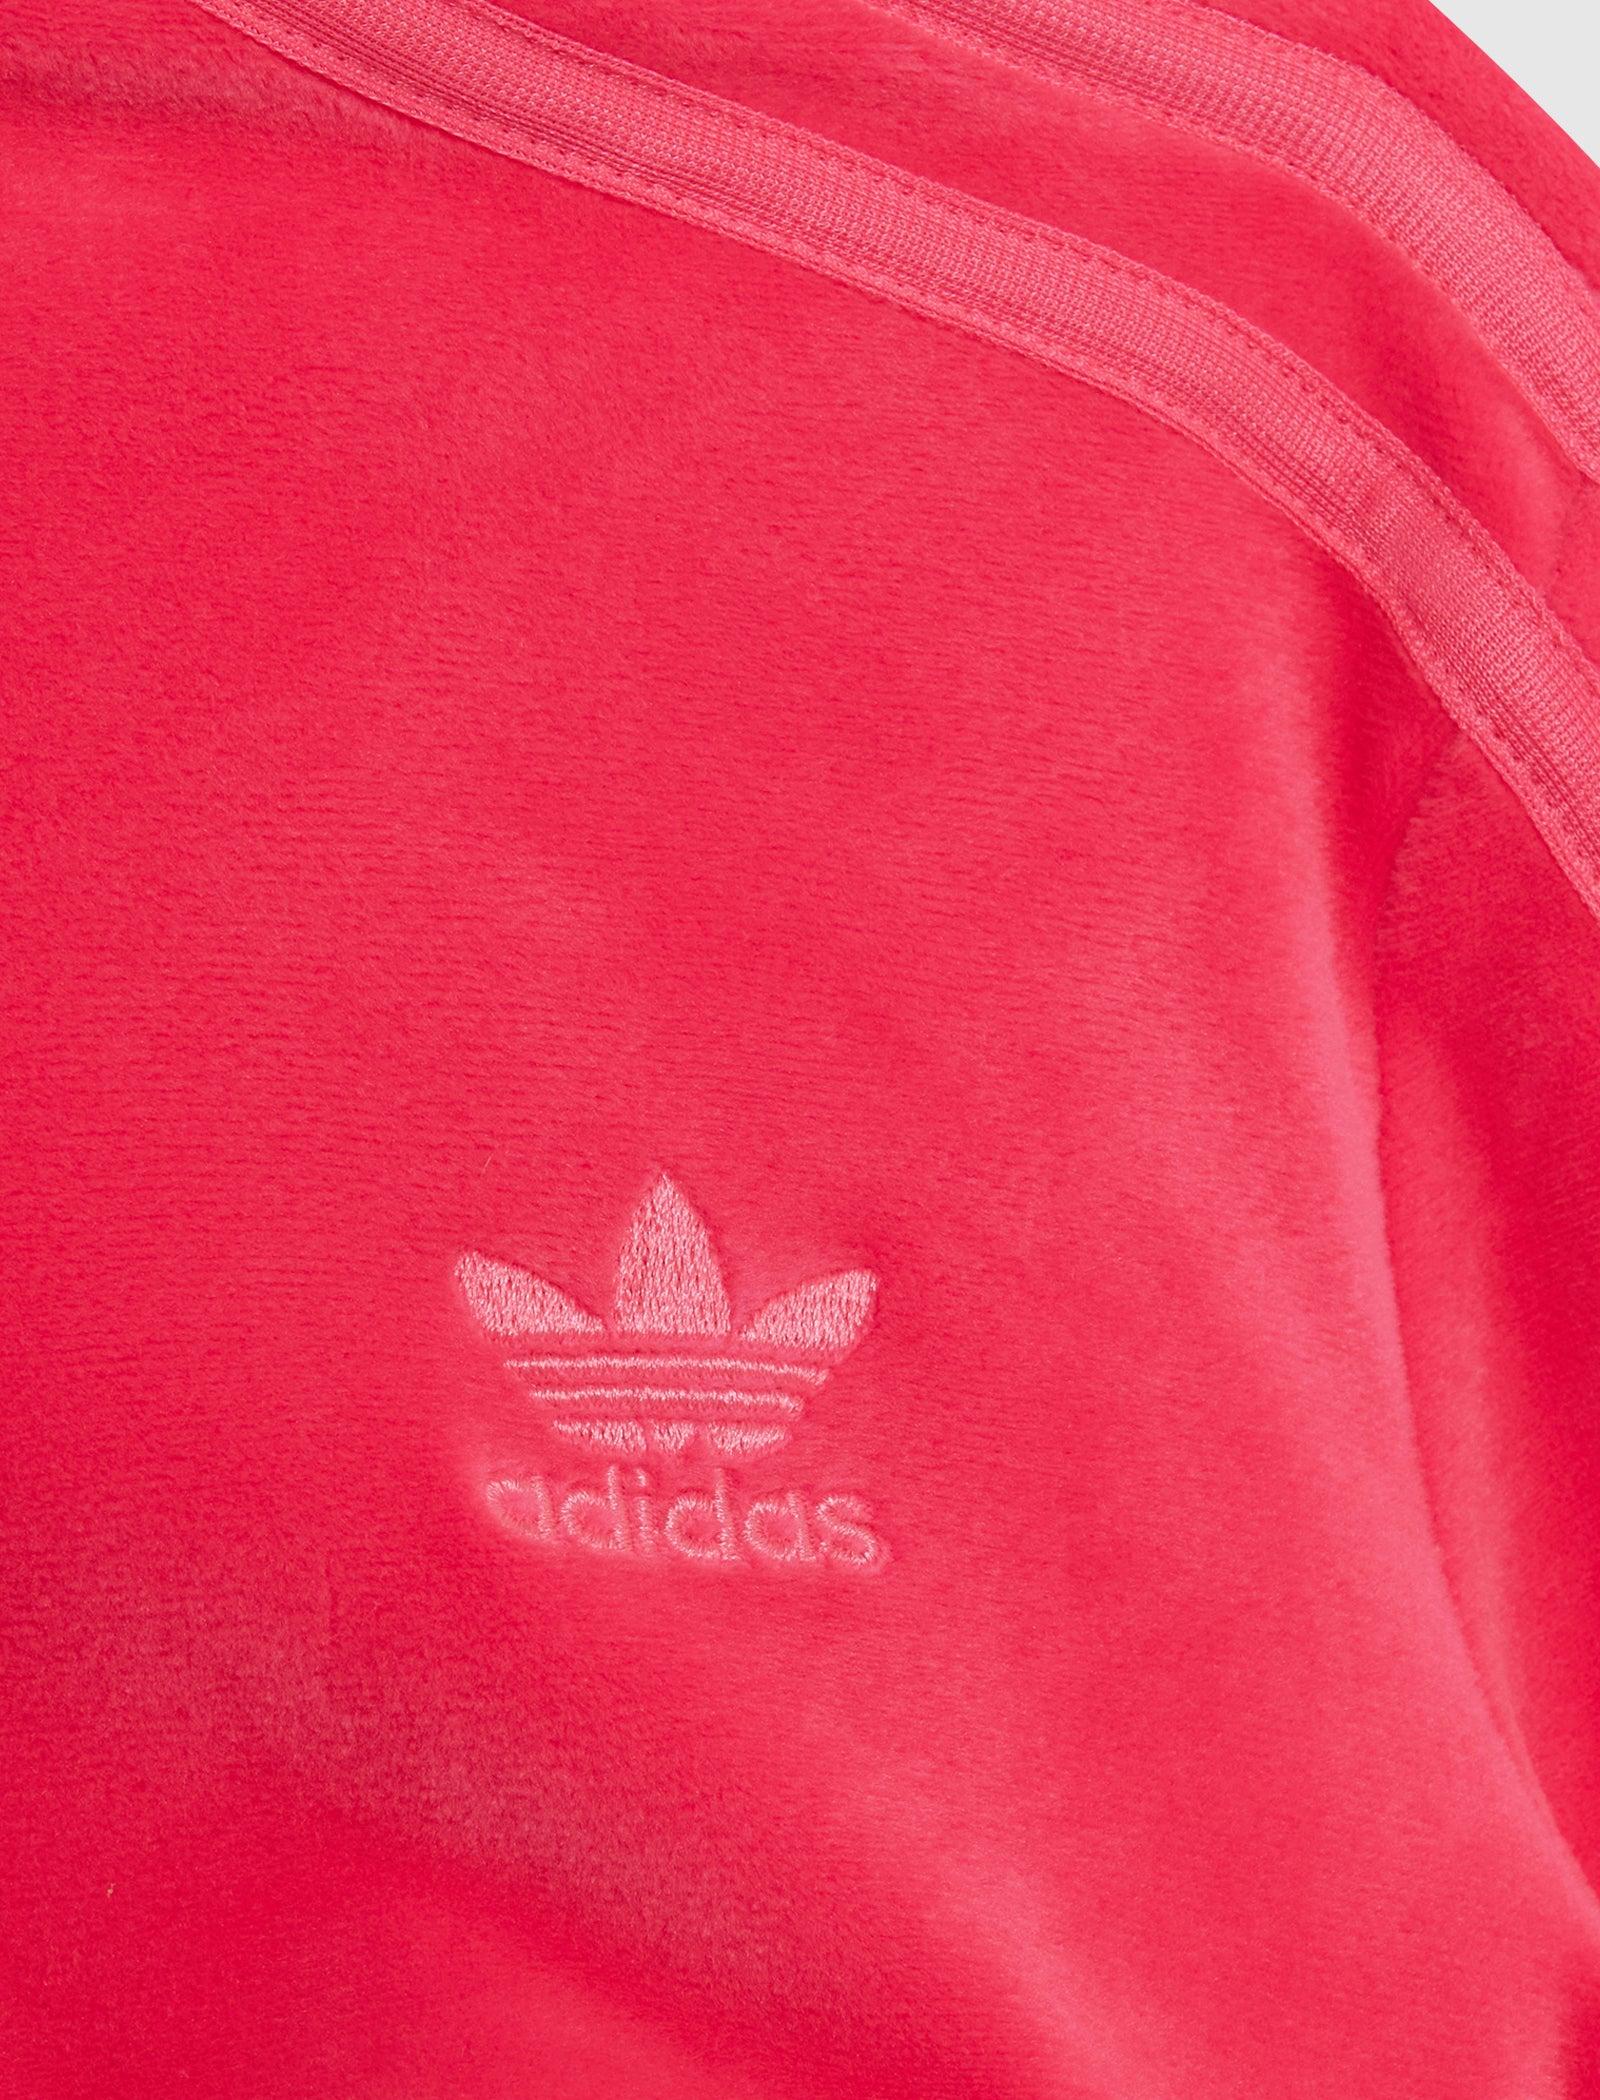 adidas Jeremy Scott Track Top in Red | Lyst